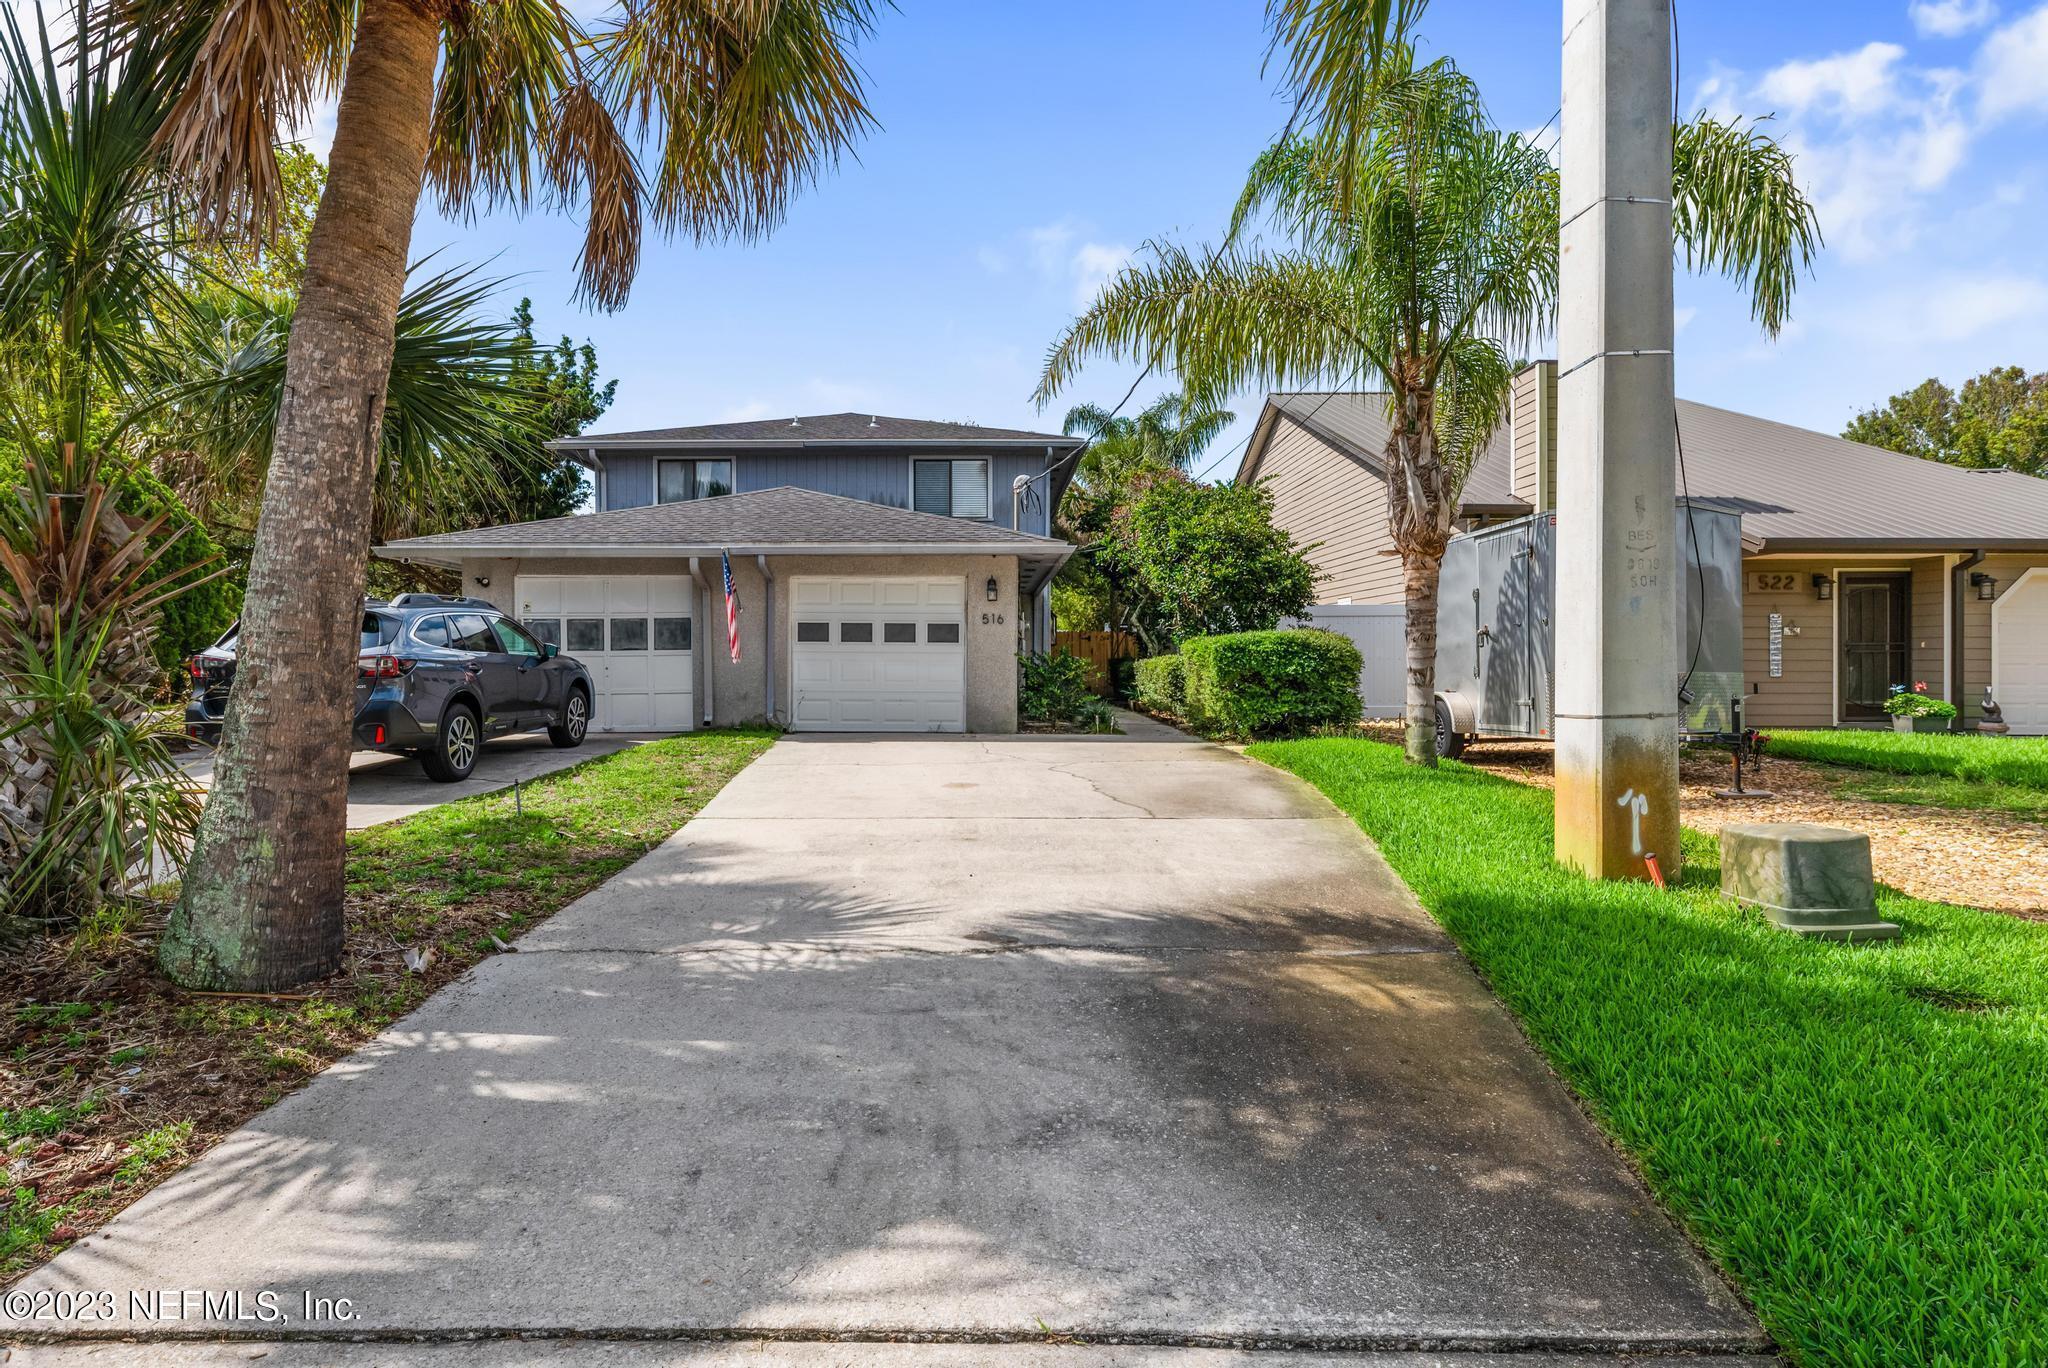 Jacksonville Beach, FL home for sale located at 516 10th Avenue S, Jacksonville Beach, FL 32250